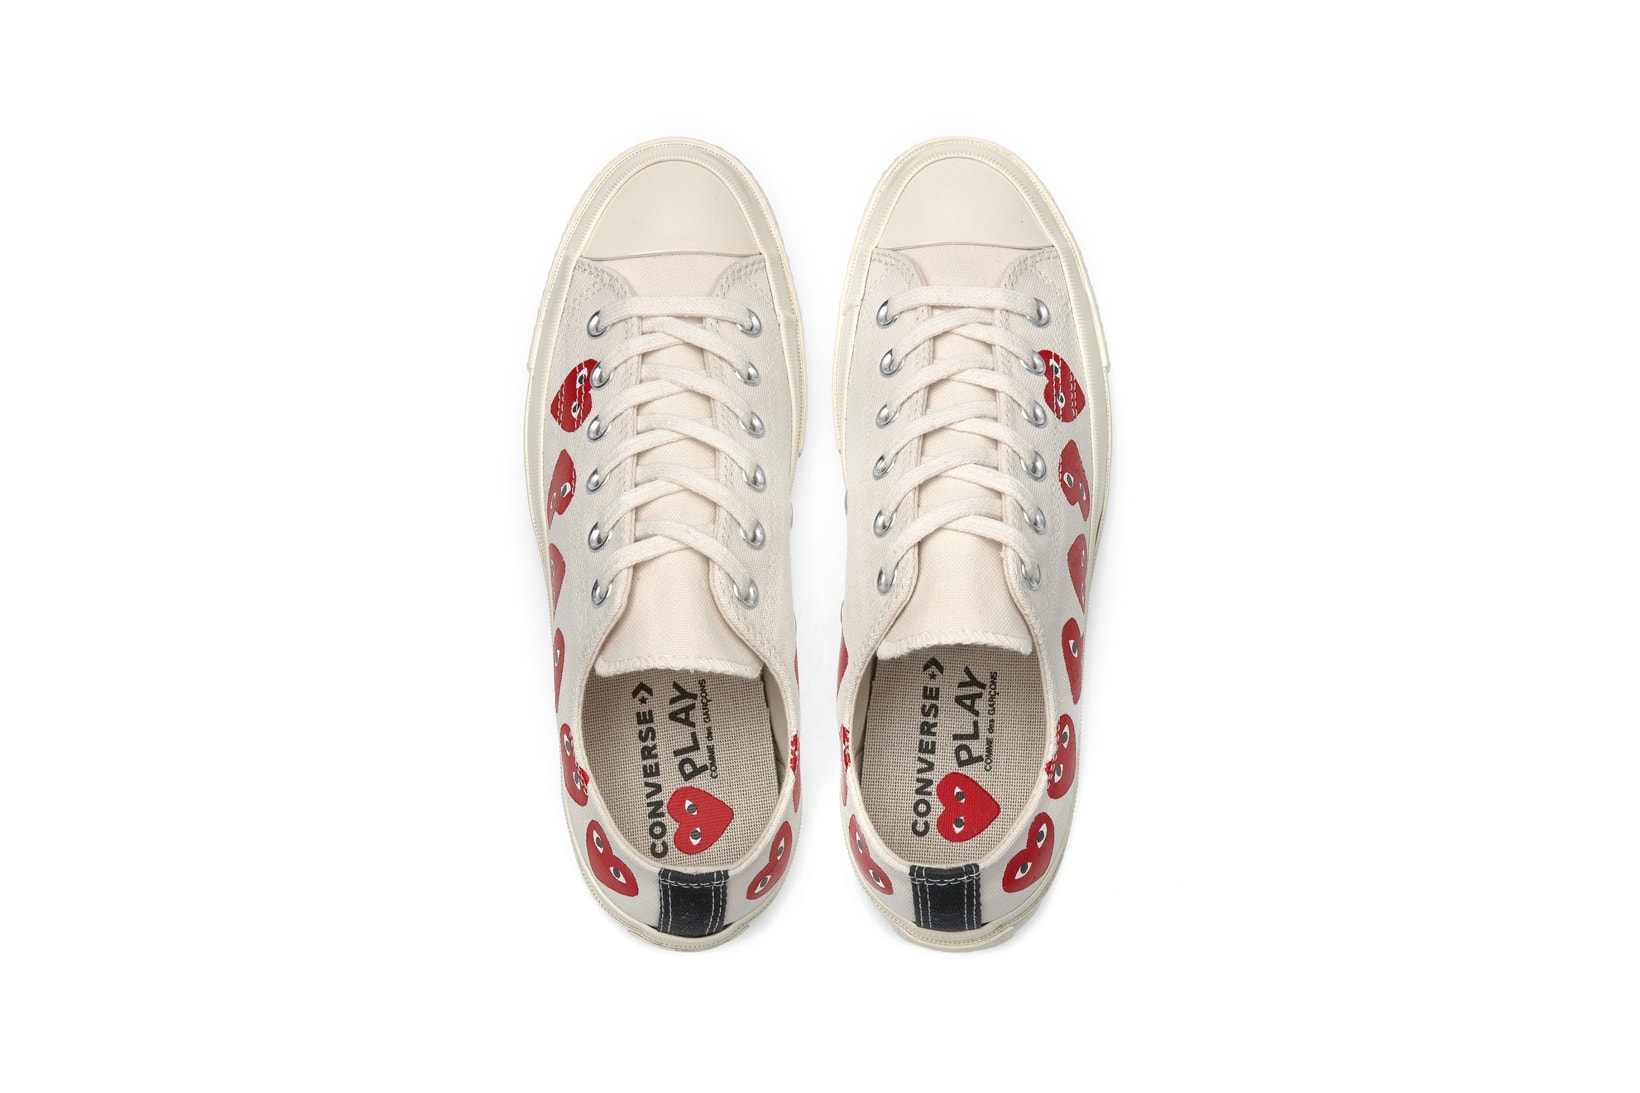 COMME des GARCONS x Converse All Star Low Top White